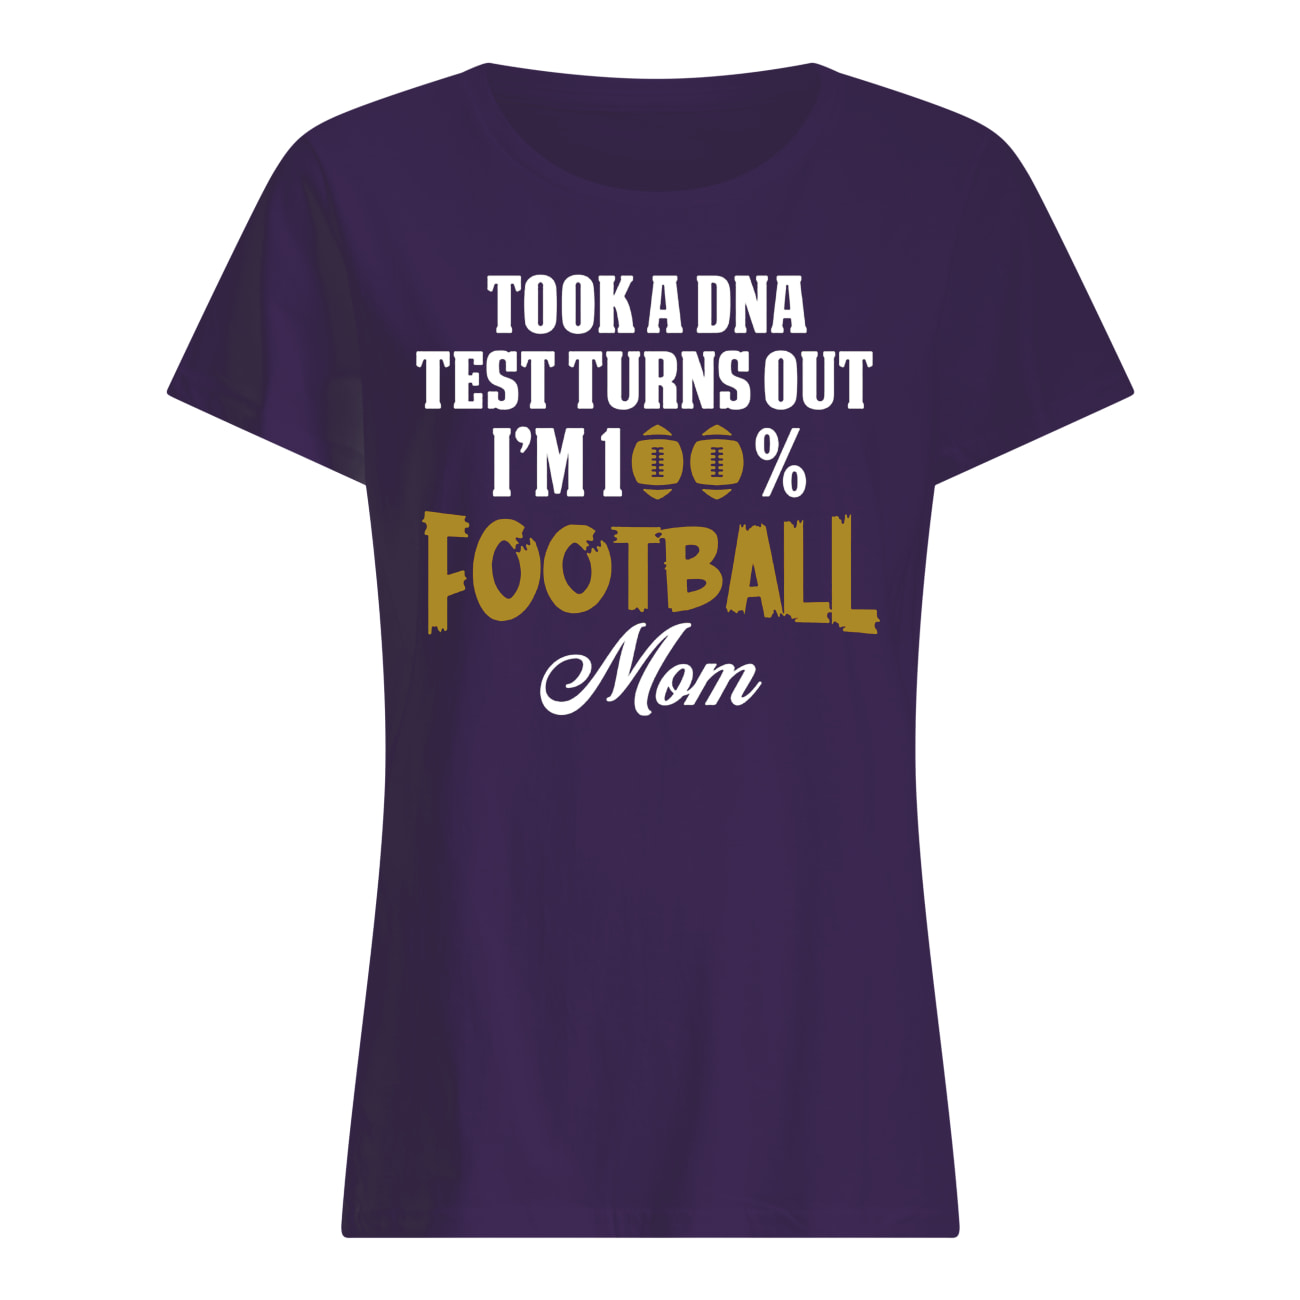 Took a dna test turns out I'm 100% football mom womens shirt